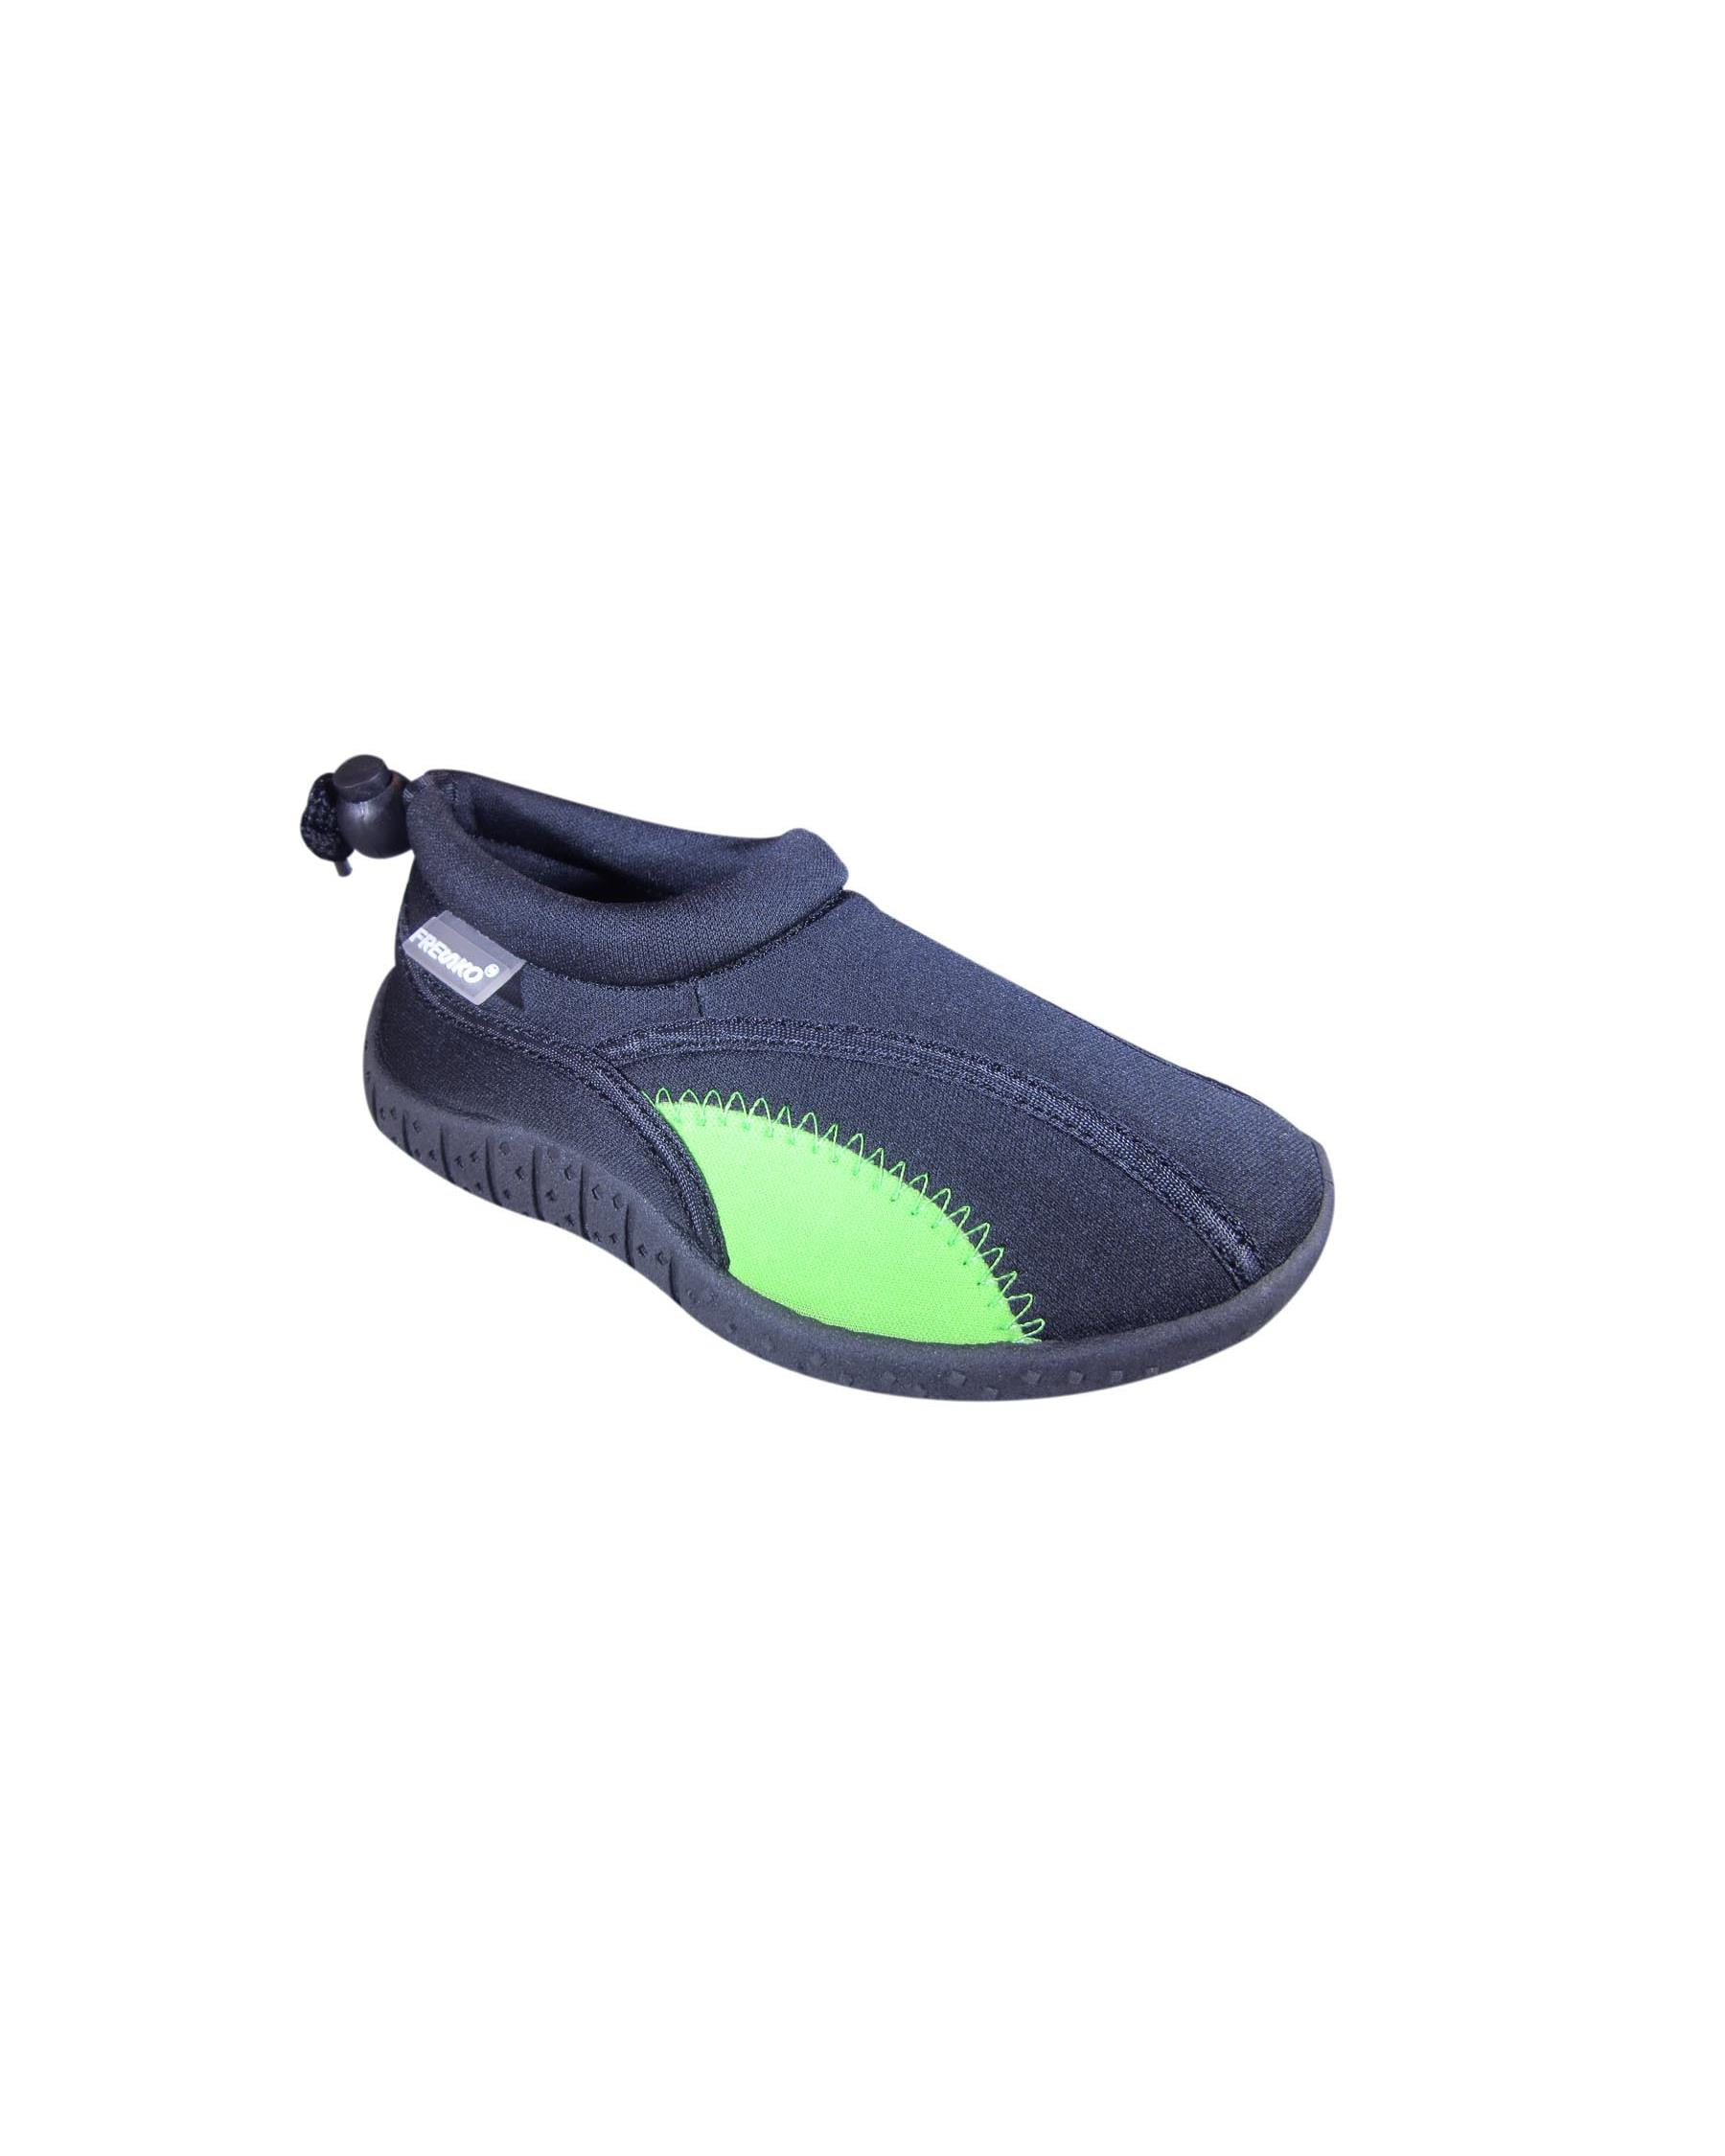 Fresko Toddler and Little Kids Water Shoes for Boys and Girls 